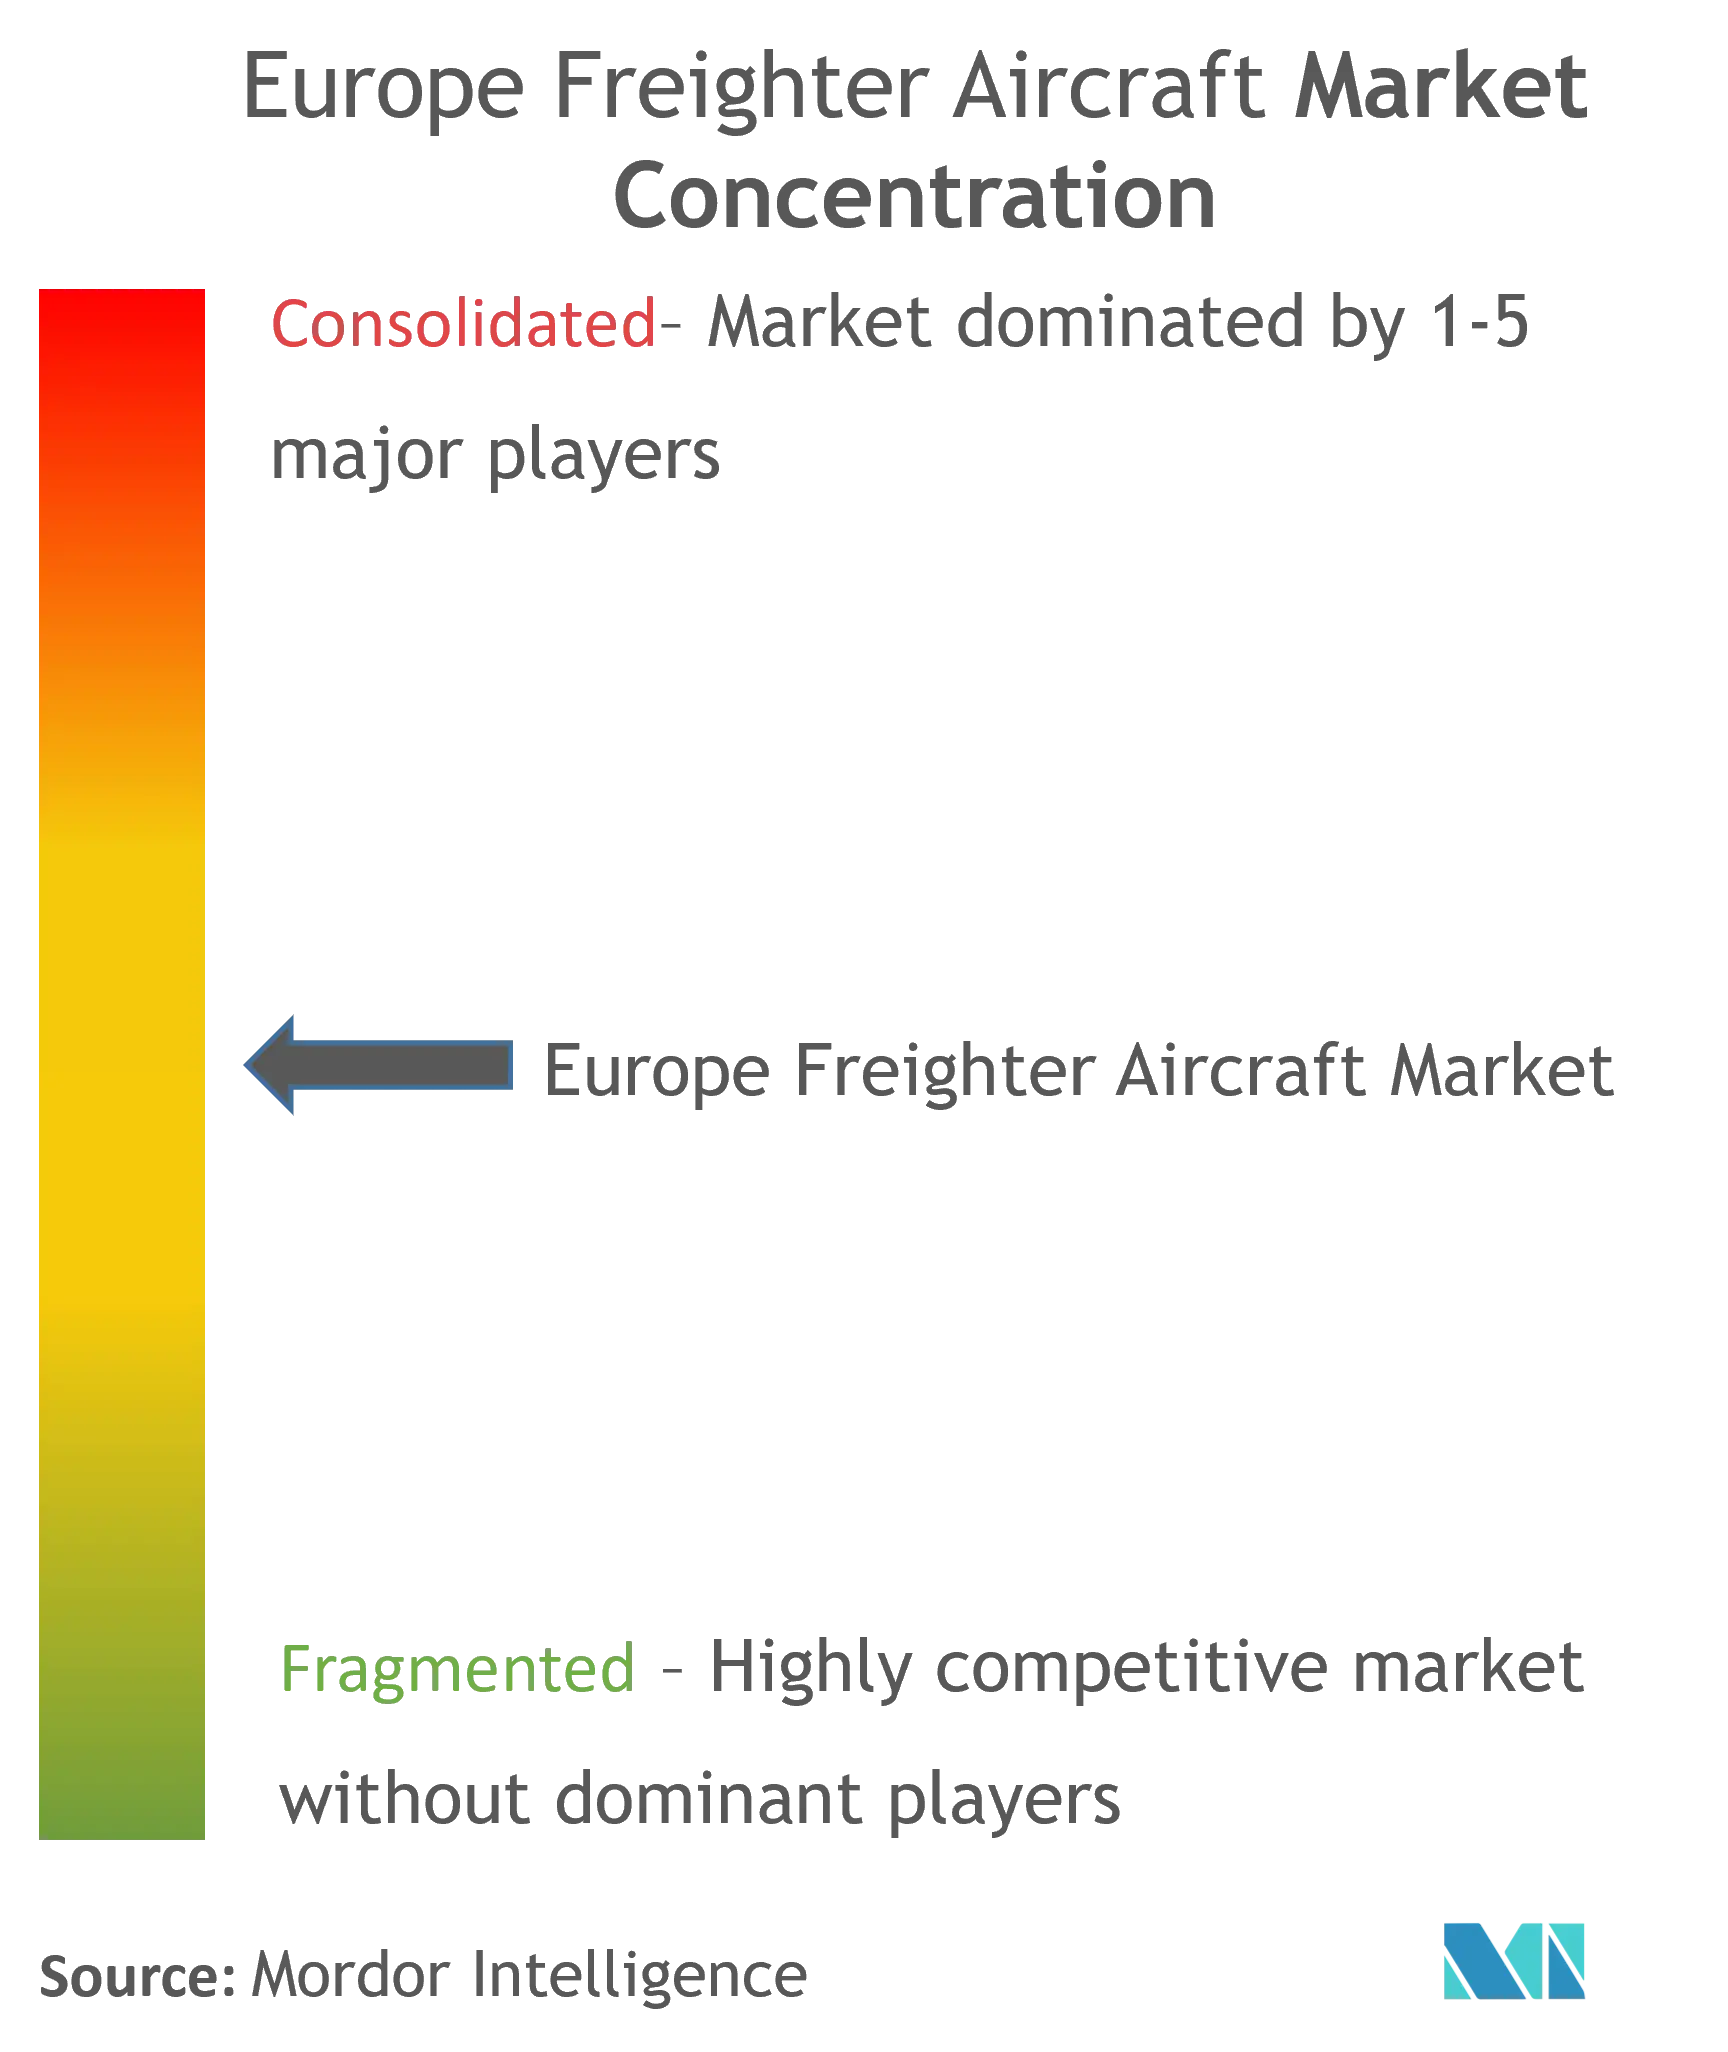 Europe Freighter Aircraft Market Concentration